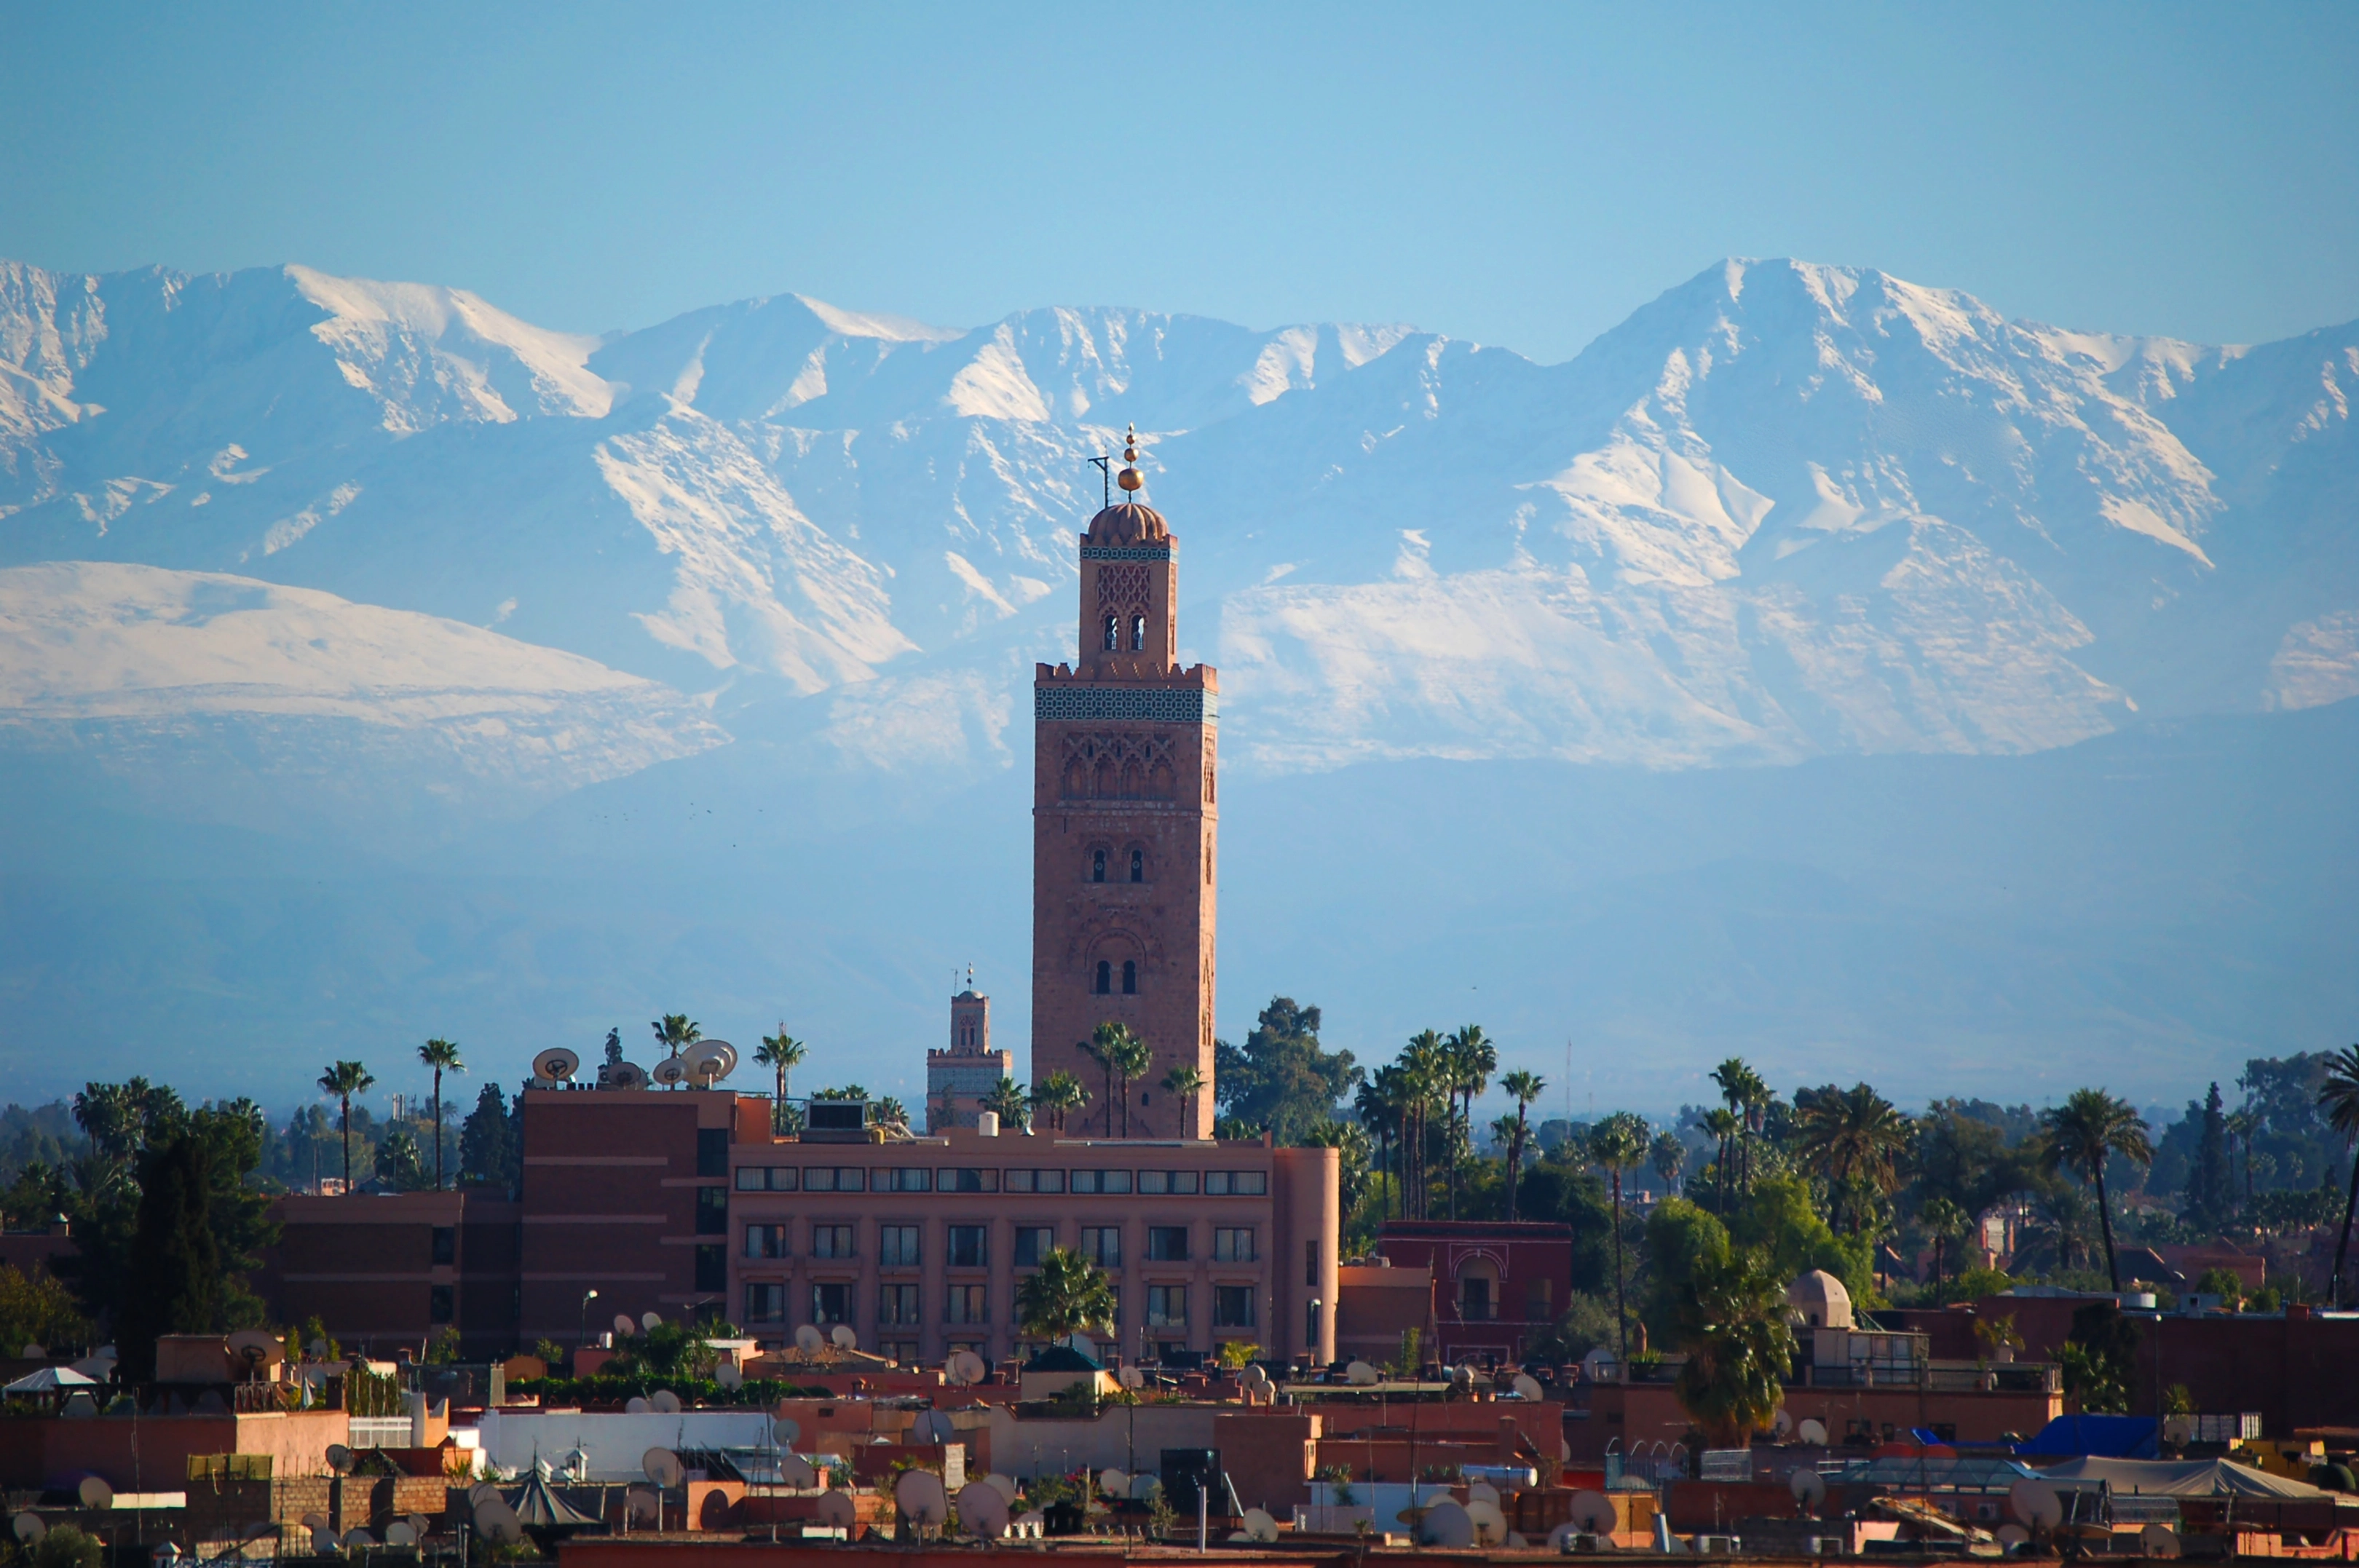 Capture your memories with a photoshoot in Marrakesh